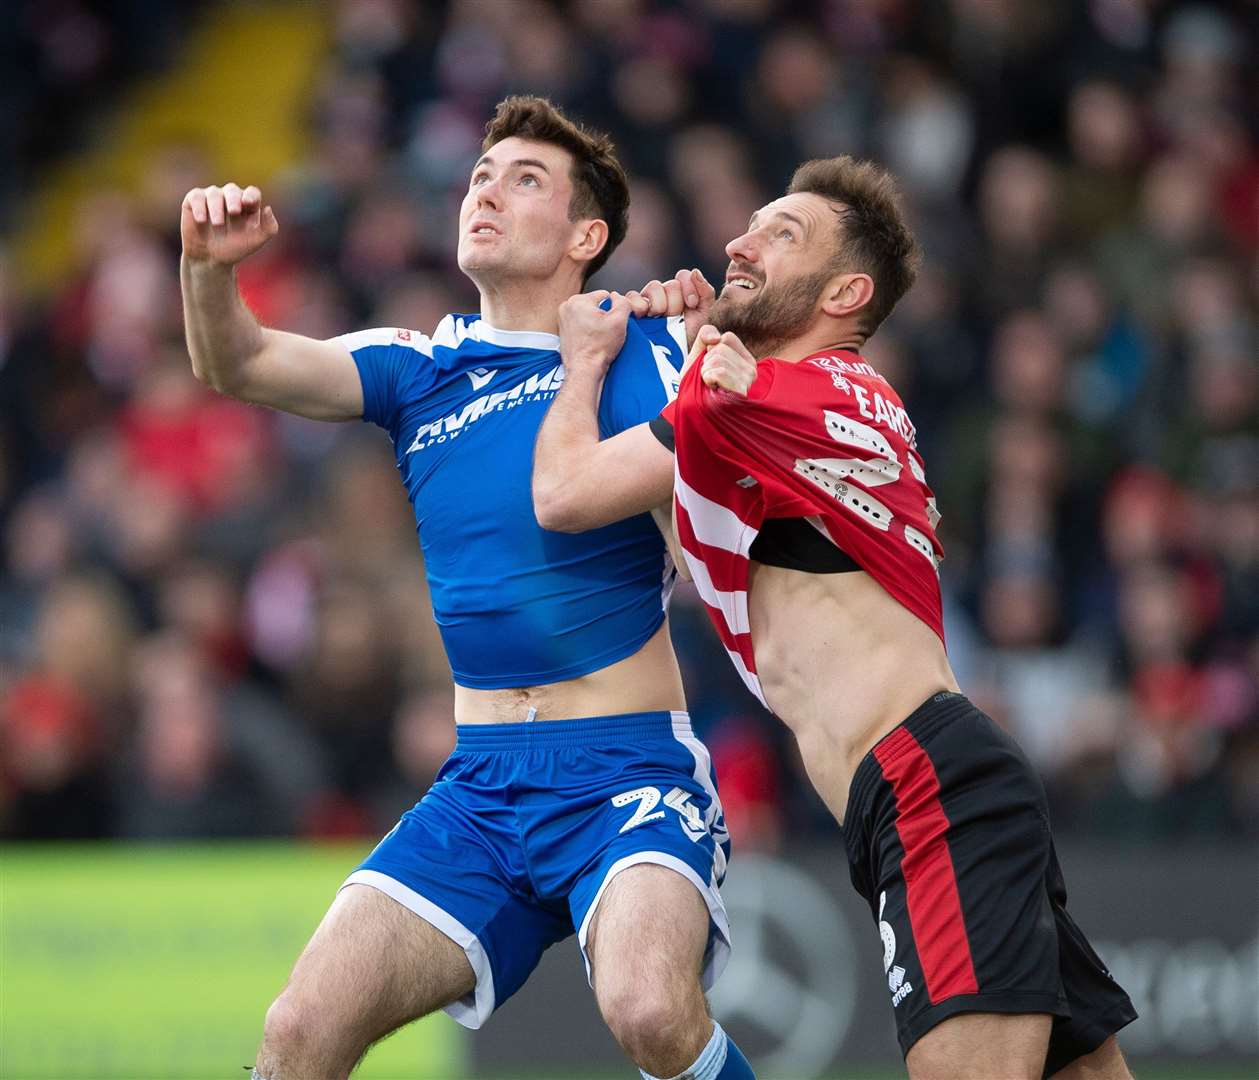 Tom O'Connor in action for Gillingham at Lincoln City back in February